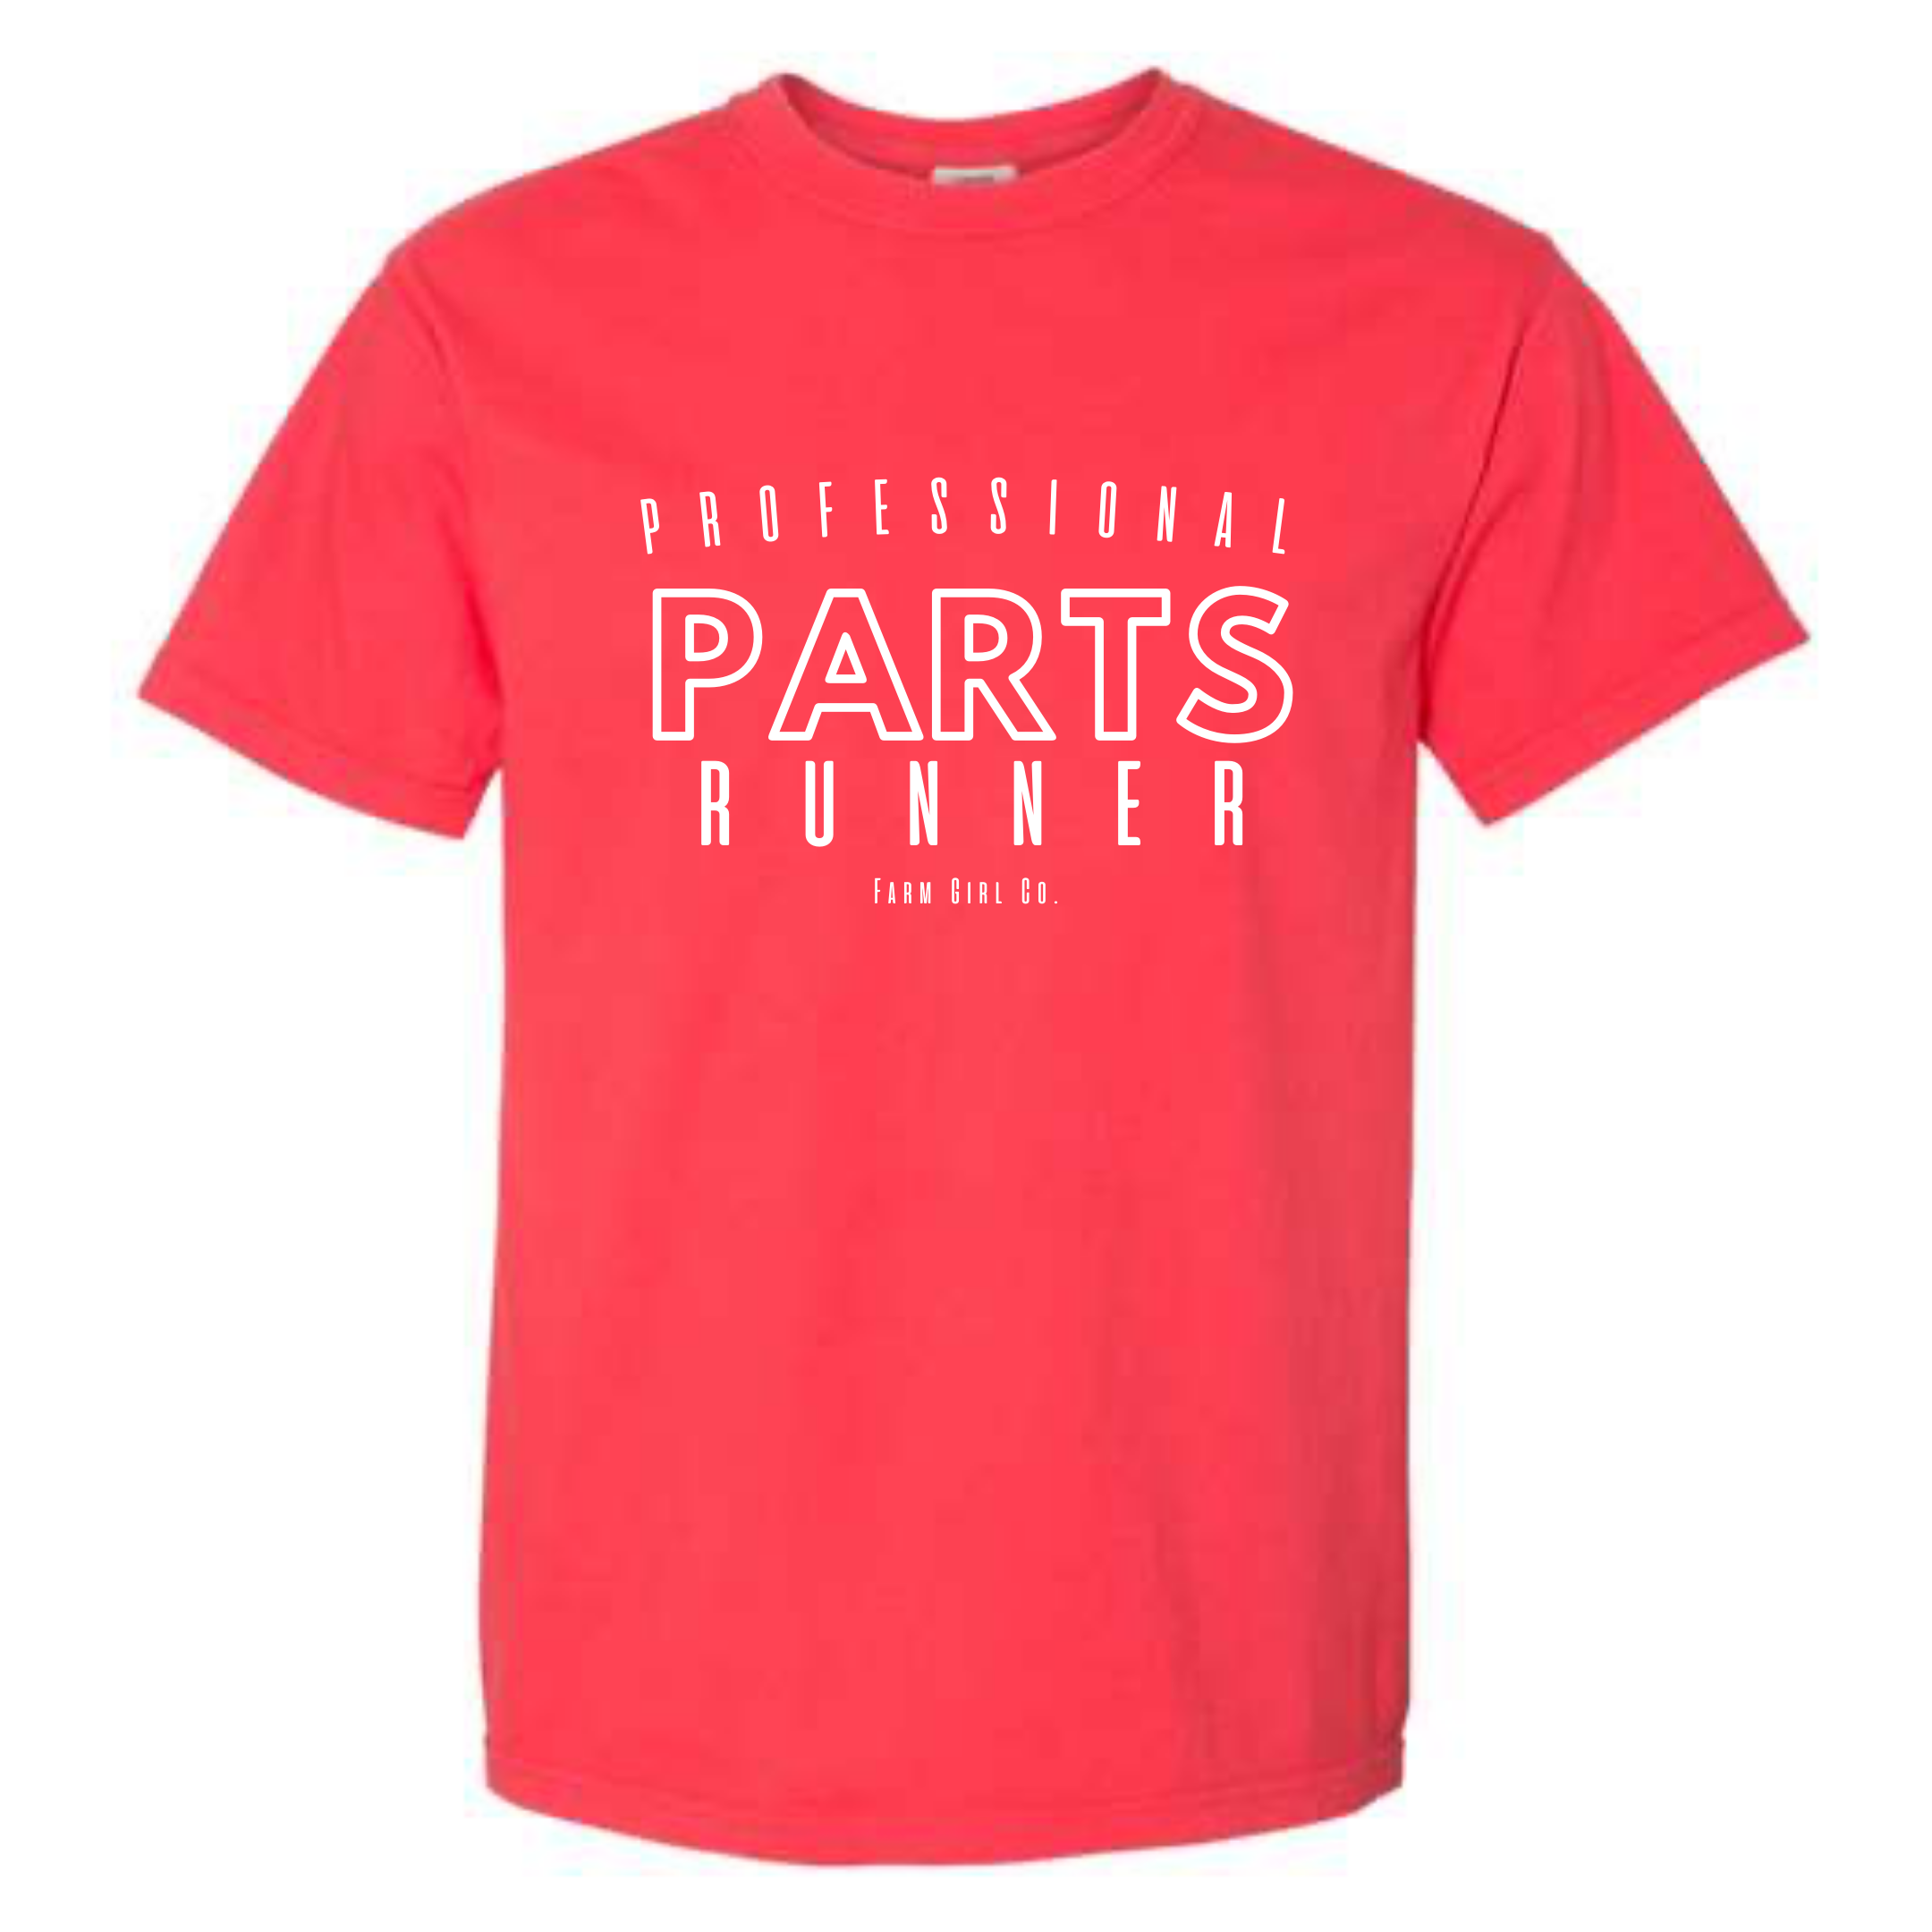 Professional Parts Runner Graphic Tee